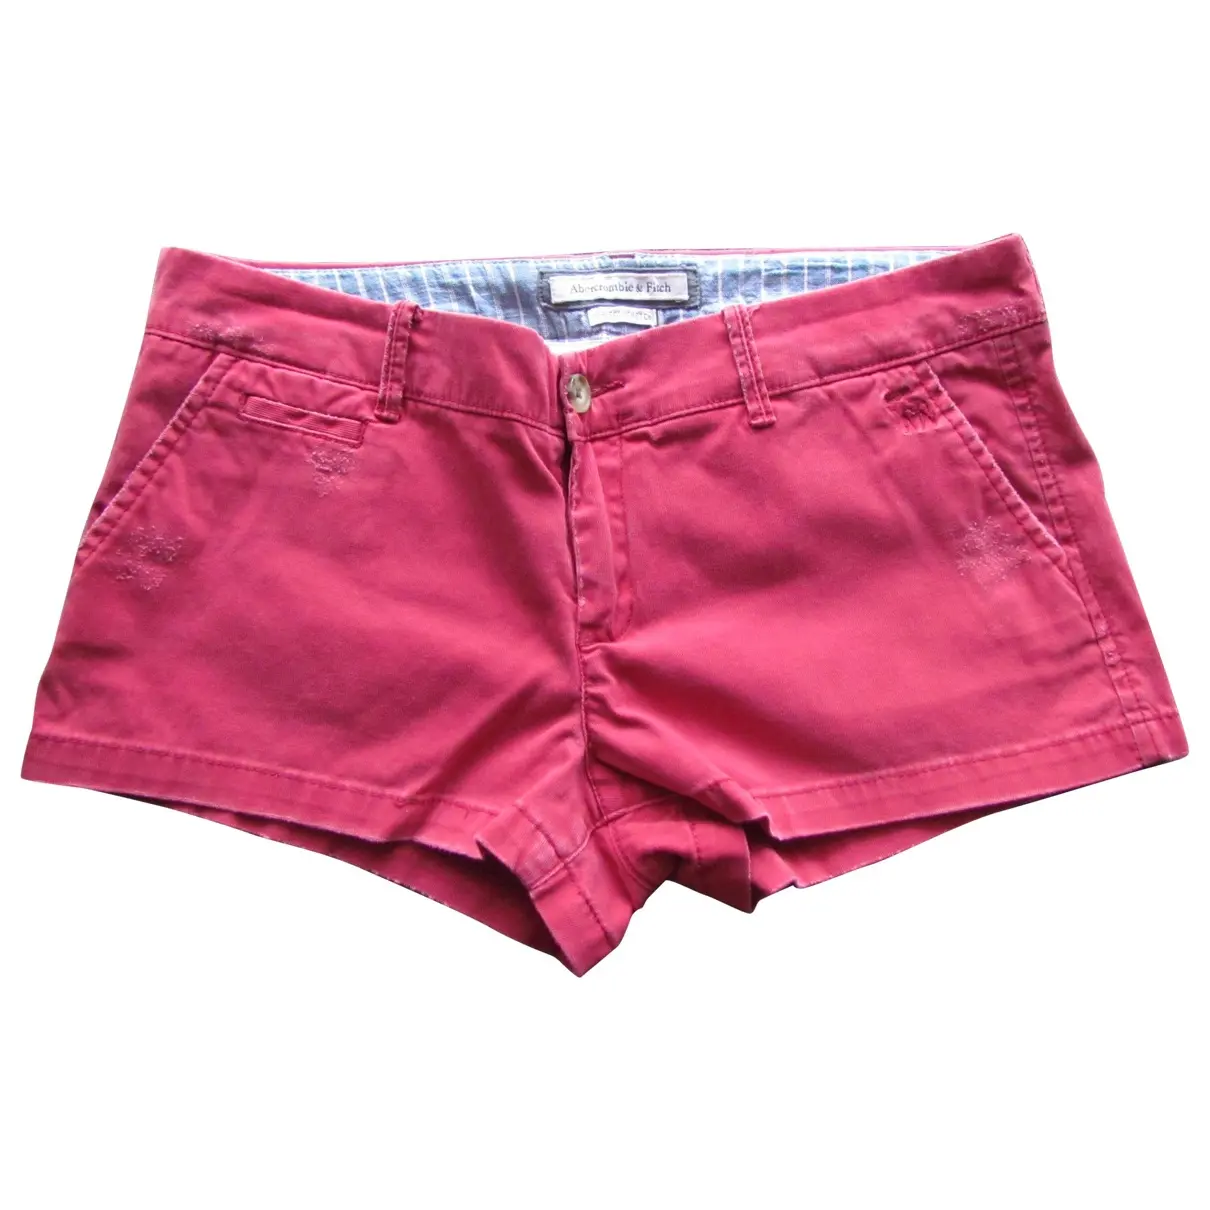 SHORTS Abercrombie & Fitch